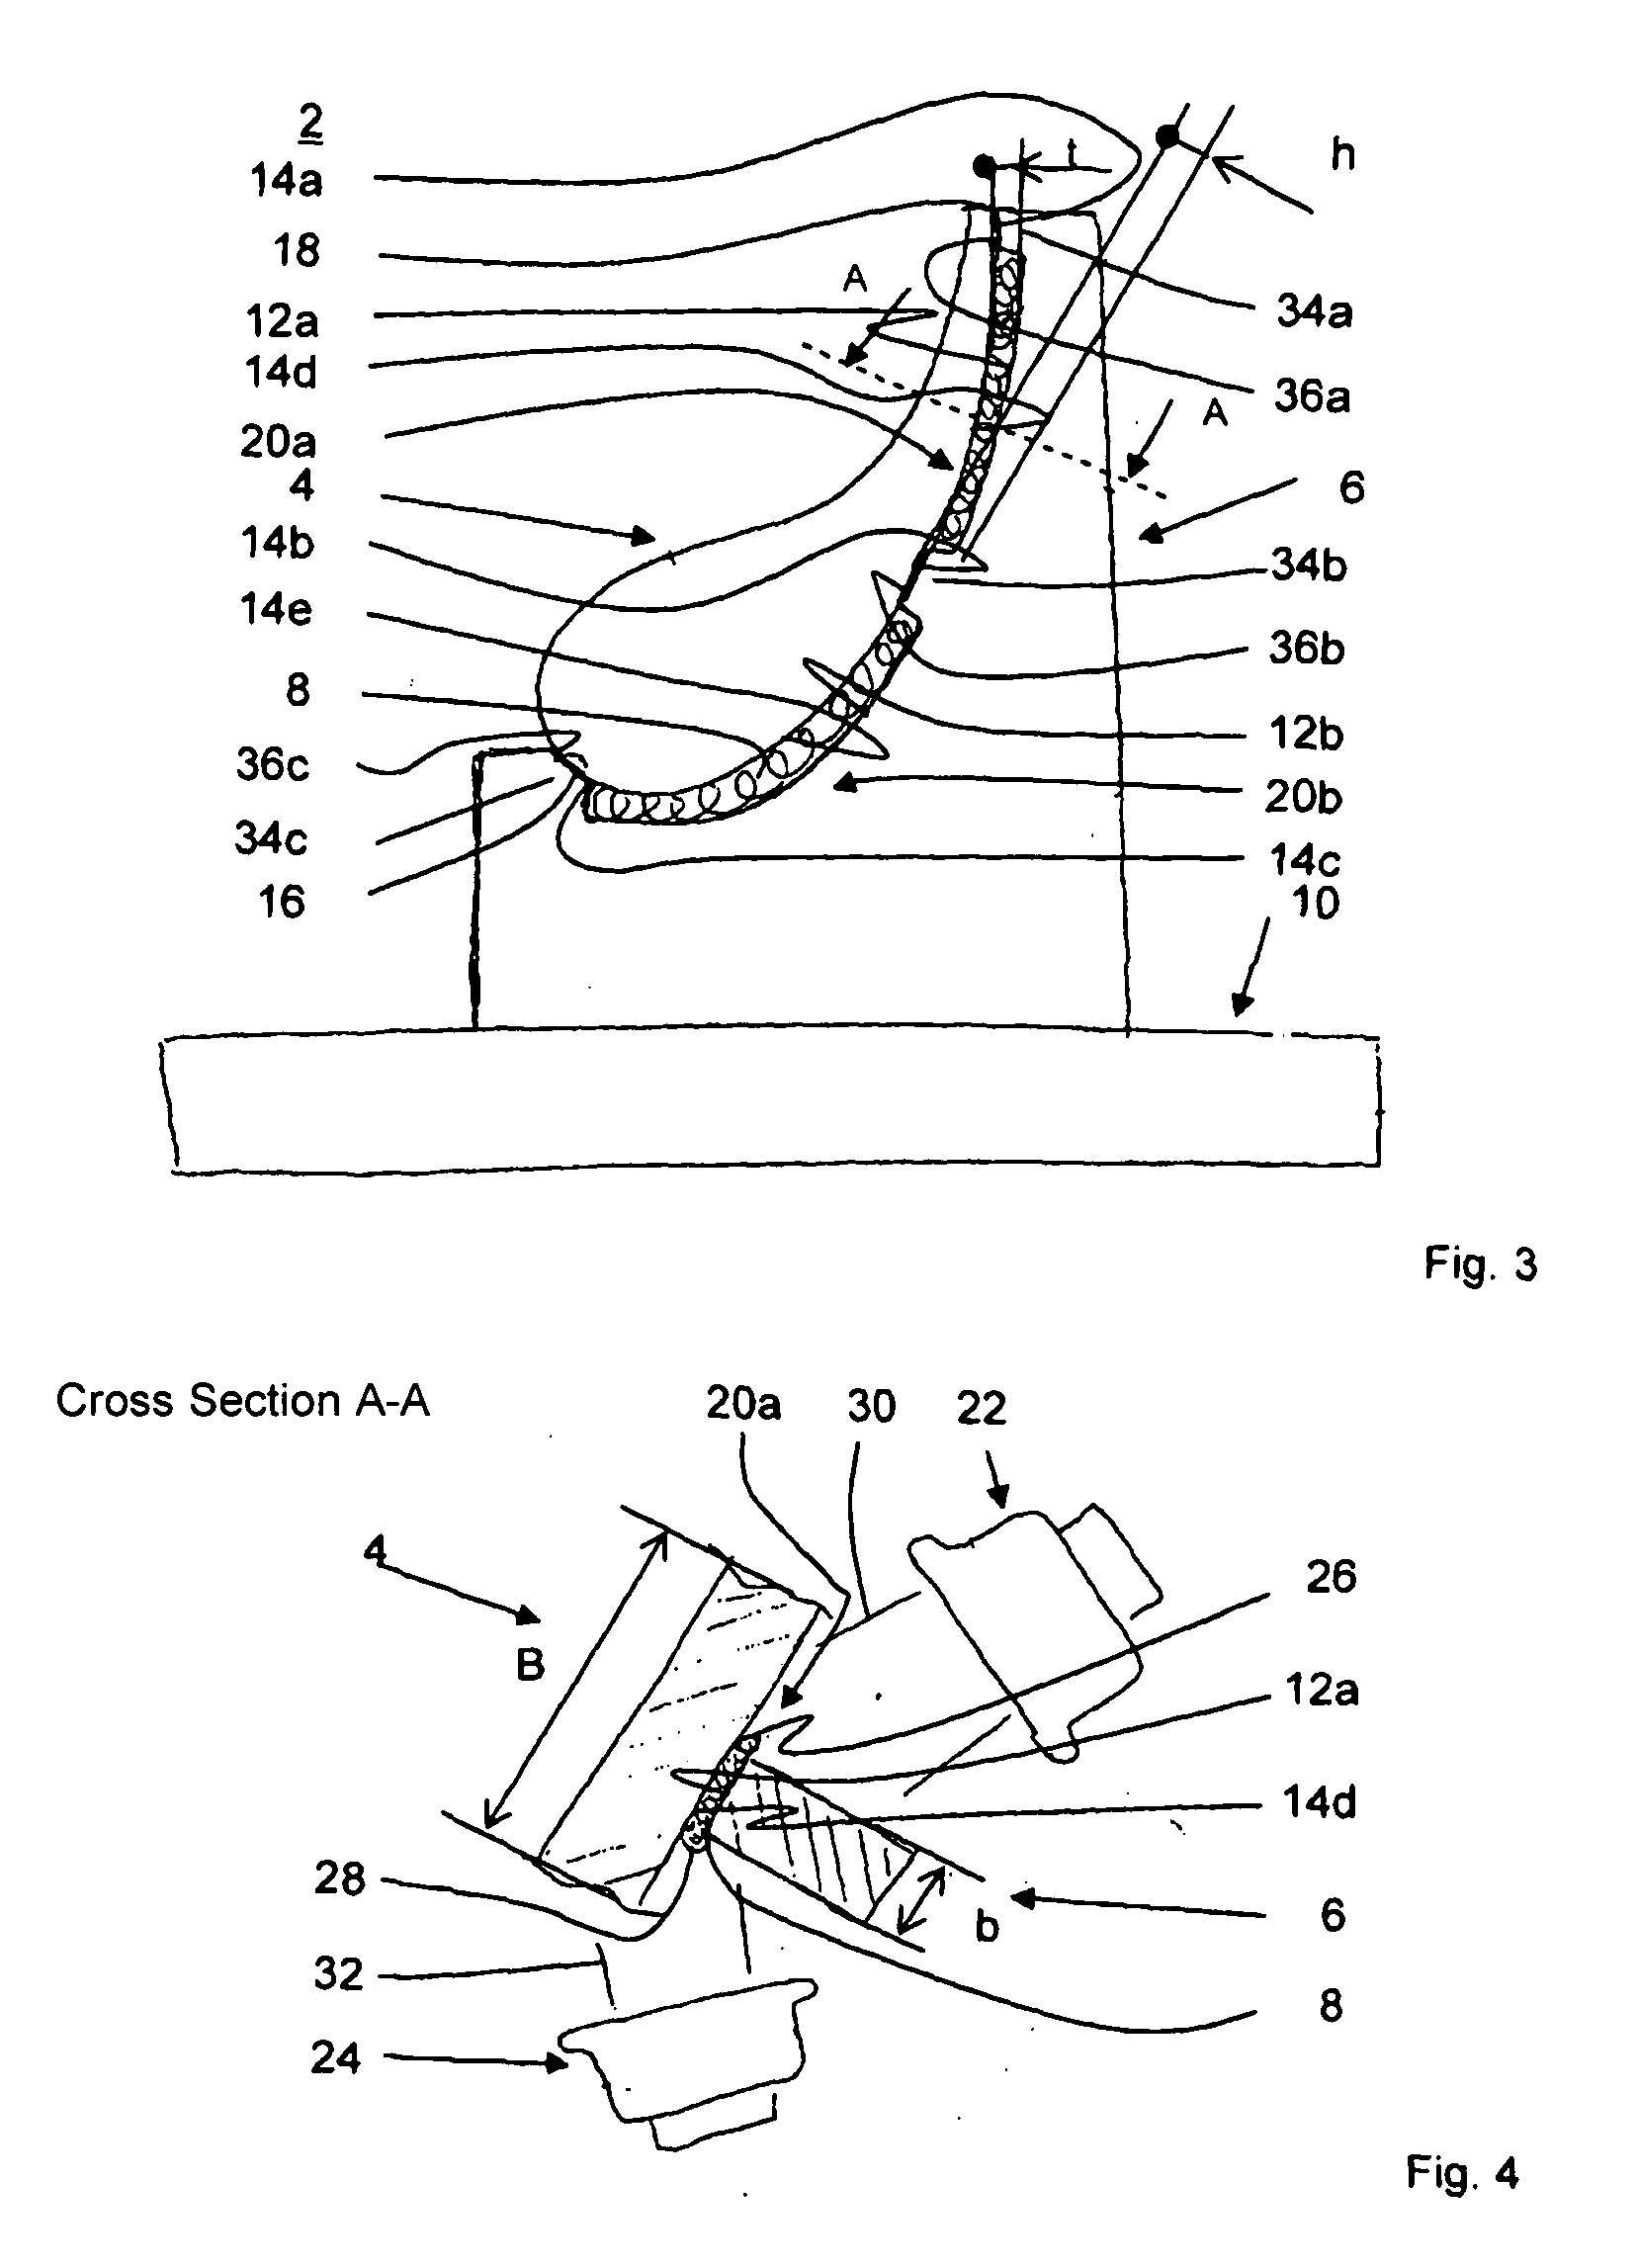 Device and Method for Fixing a Component in Position on a Component Carrier